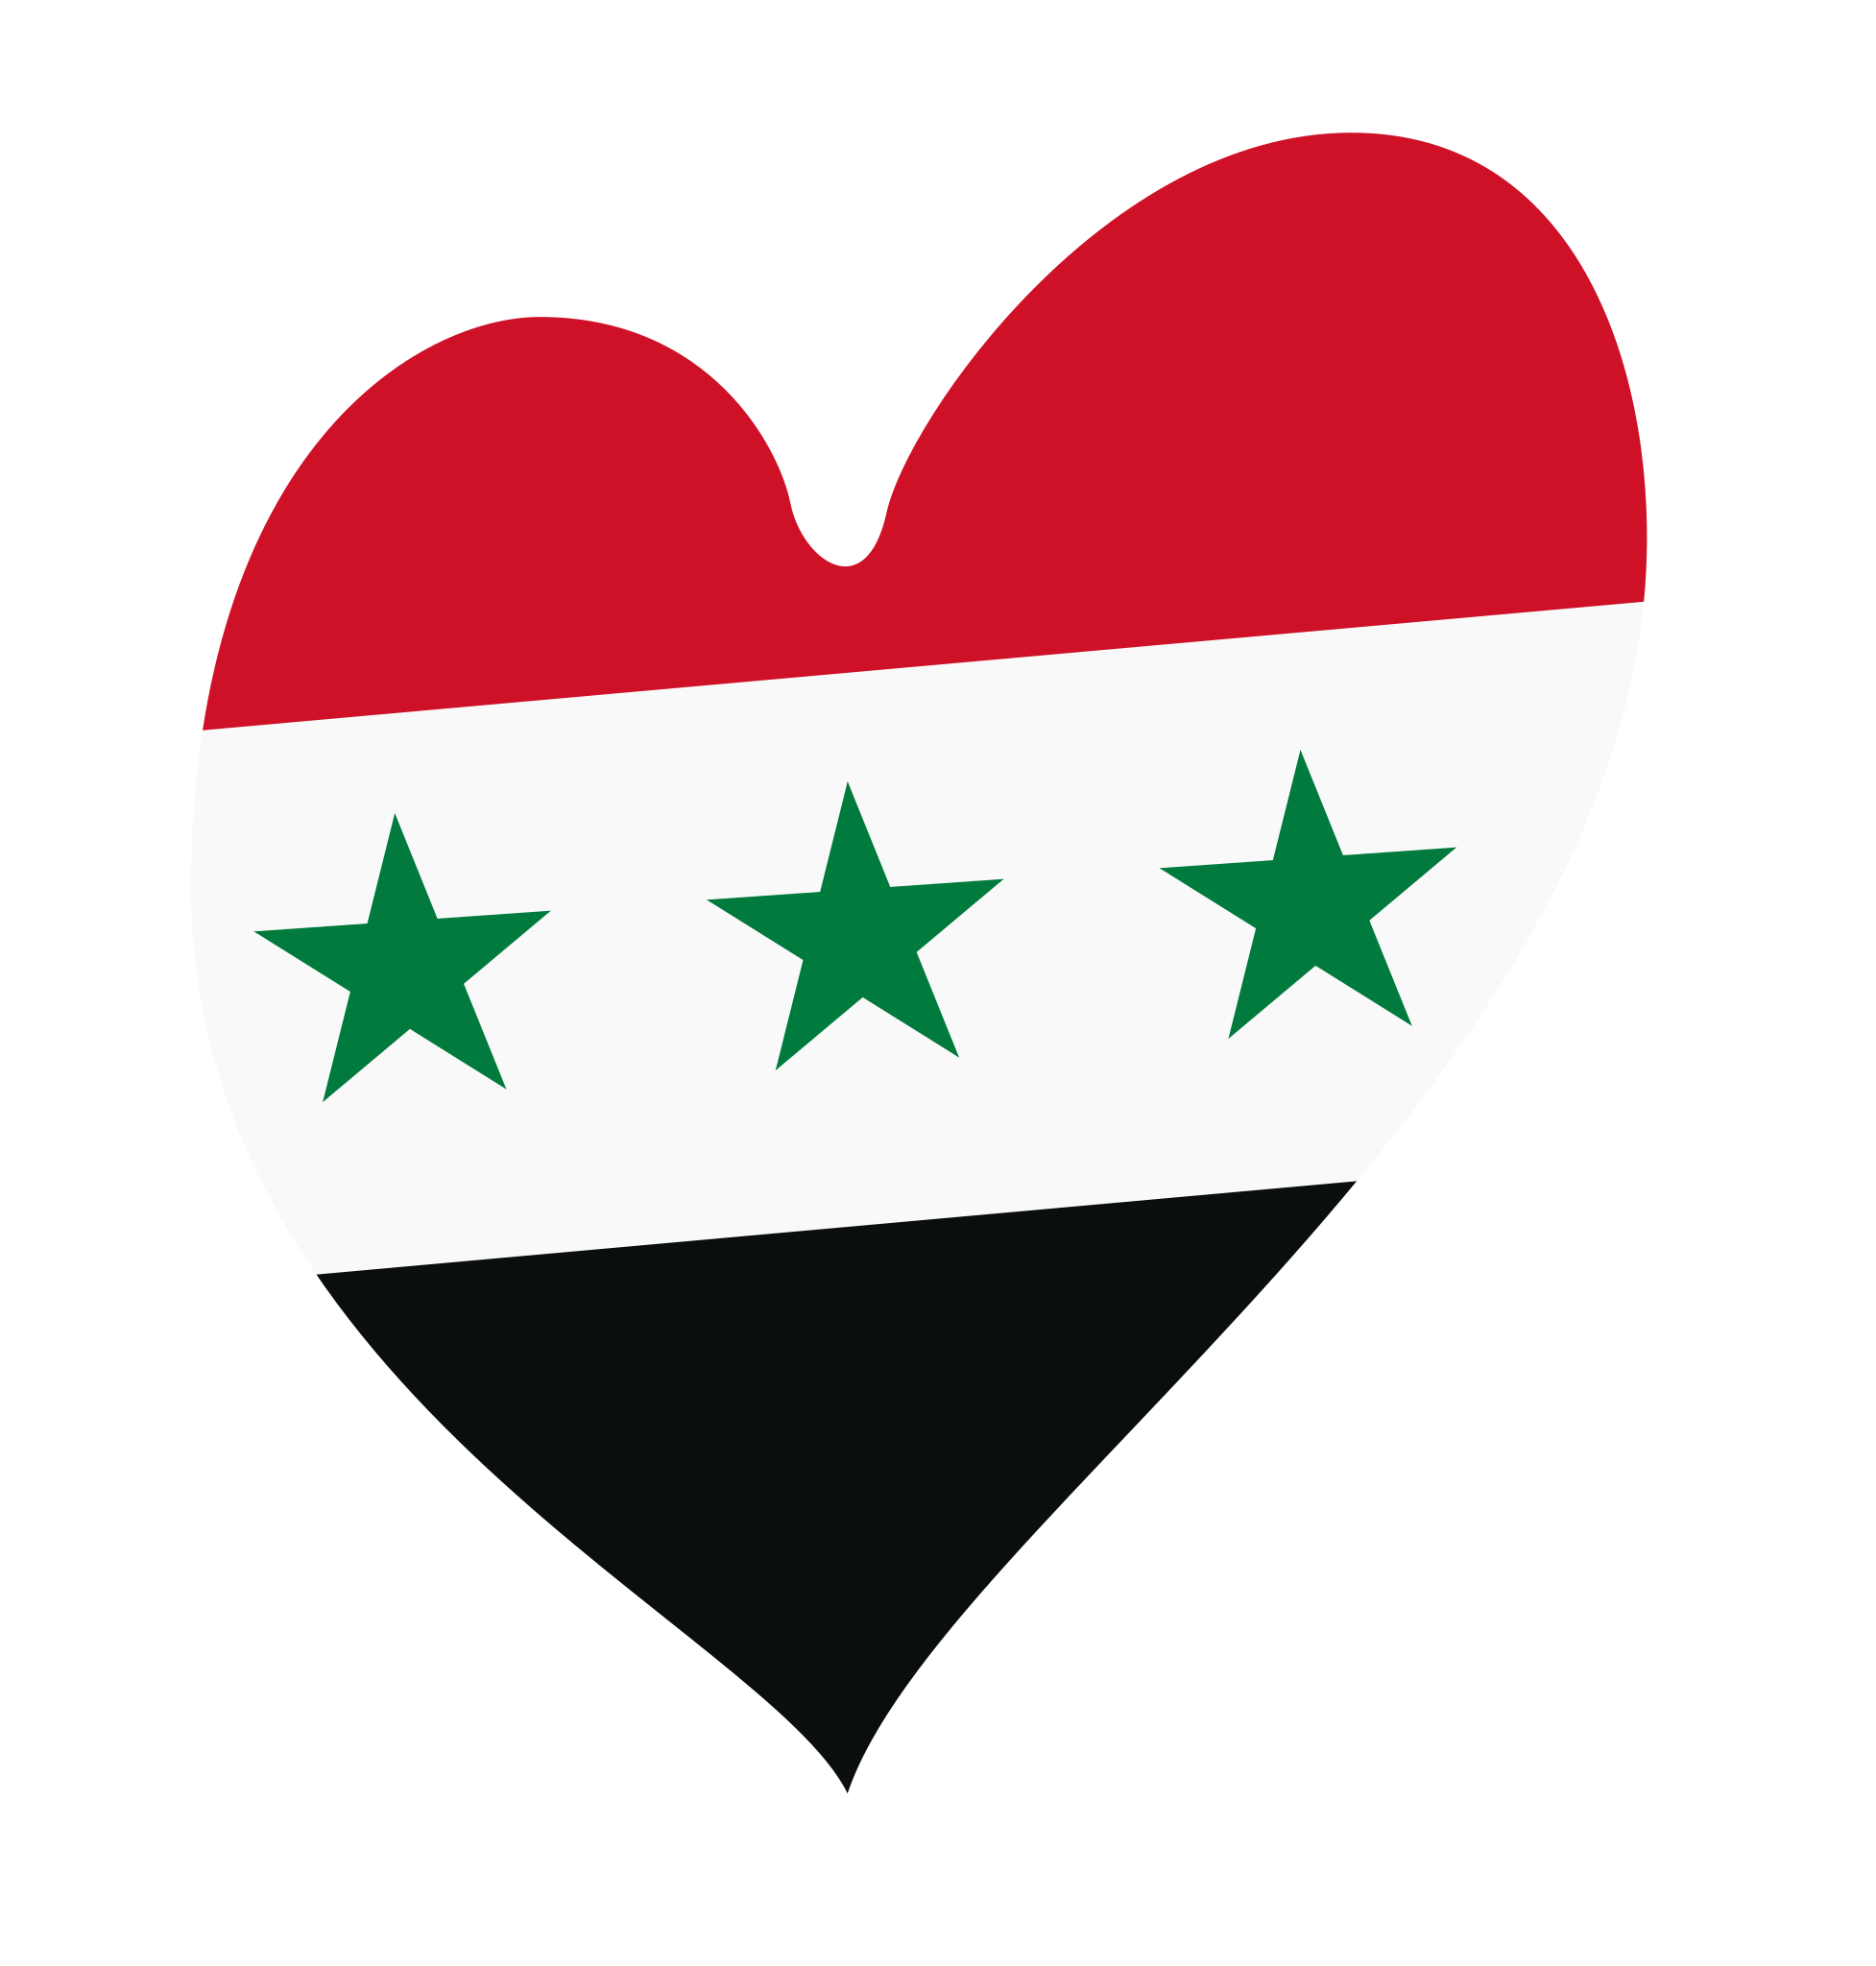 File:Eurovision Song Contest heart Iraq white (1963-1991) and Syria white ( 1963-1972).svg - Wikimedia Commons